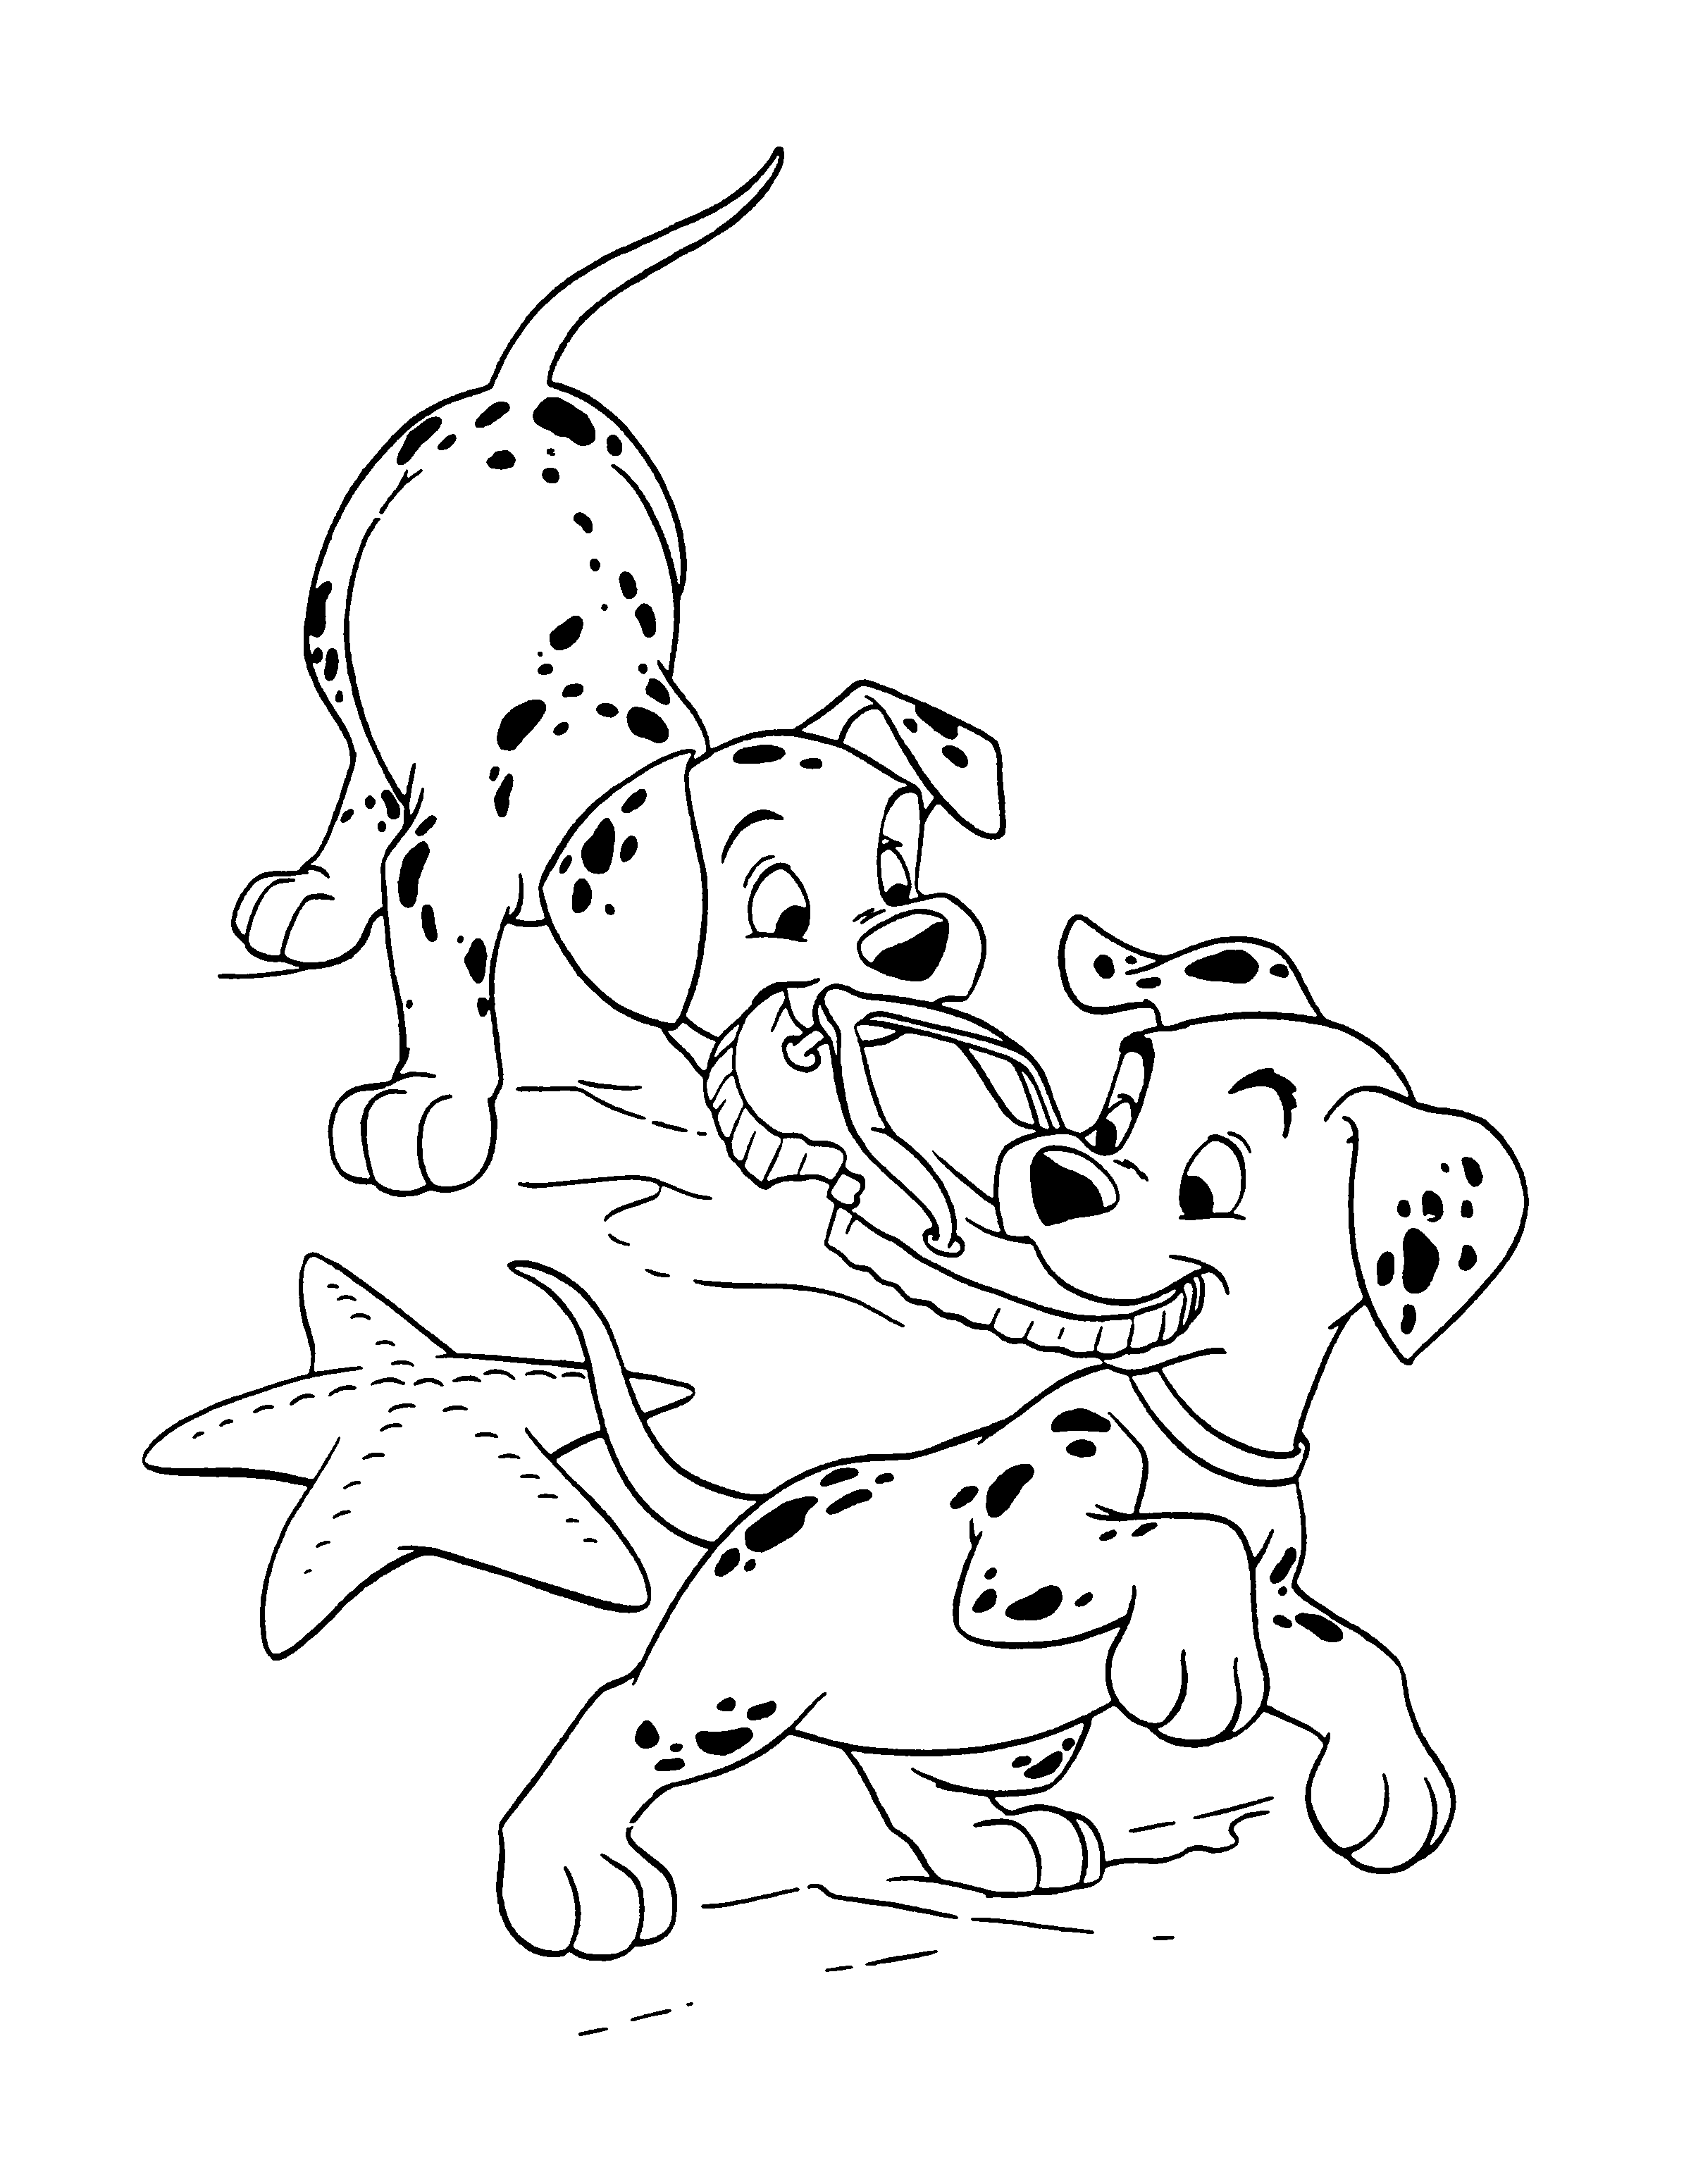 101 dalmatians to download for free - 101 Dalmatians Kids Coloring Pages